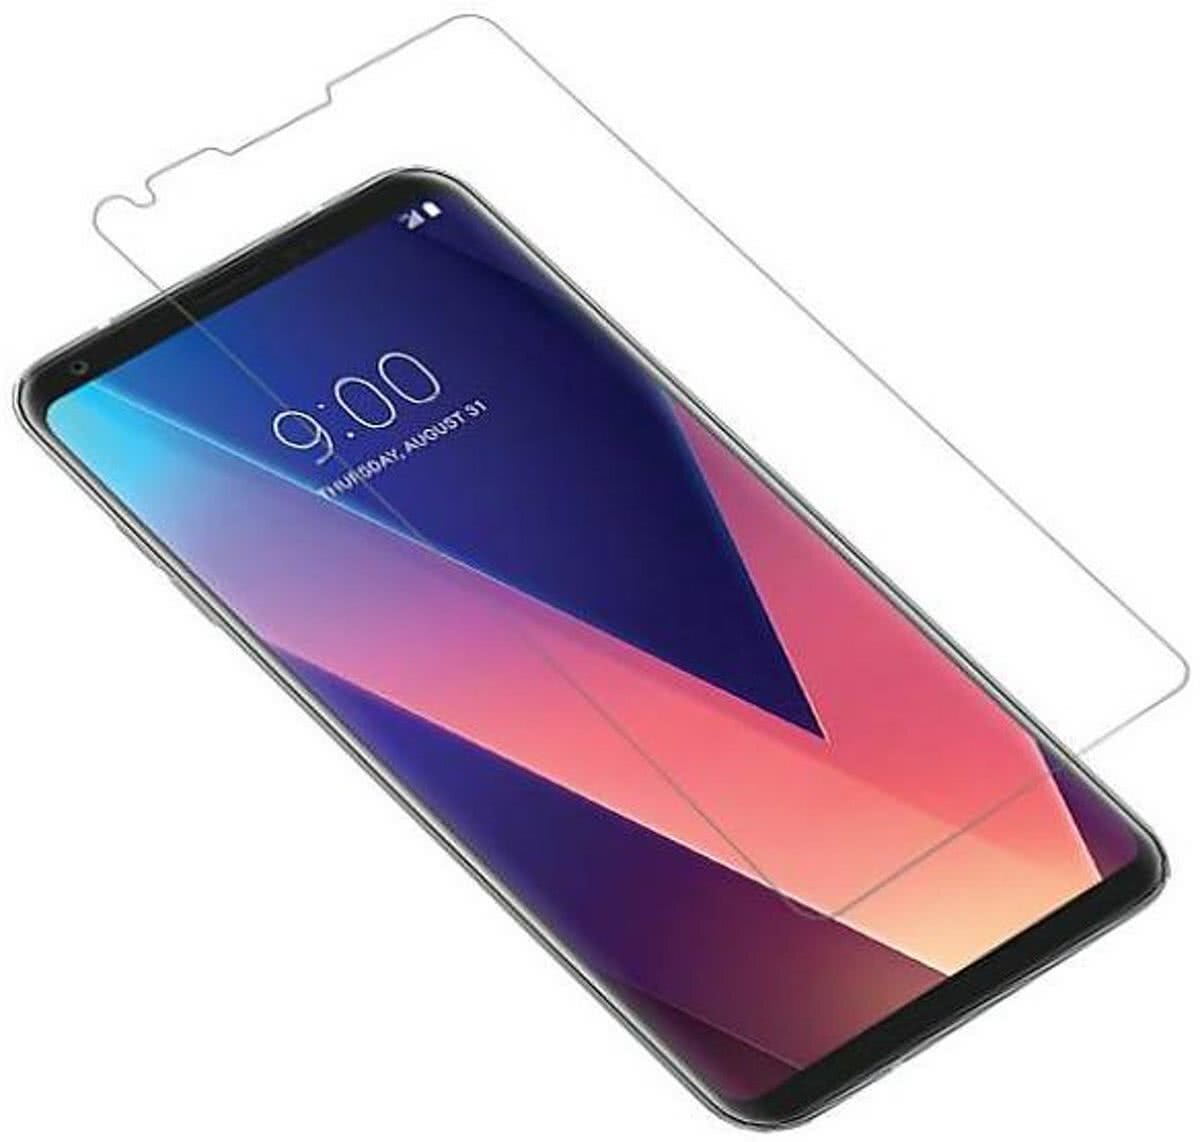 Best Cases .nl LG V30 Tempered Glass Screen Protector